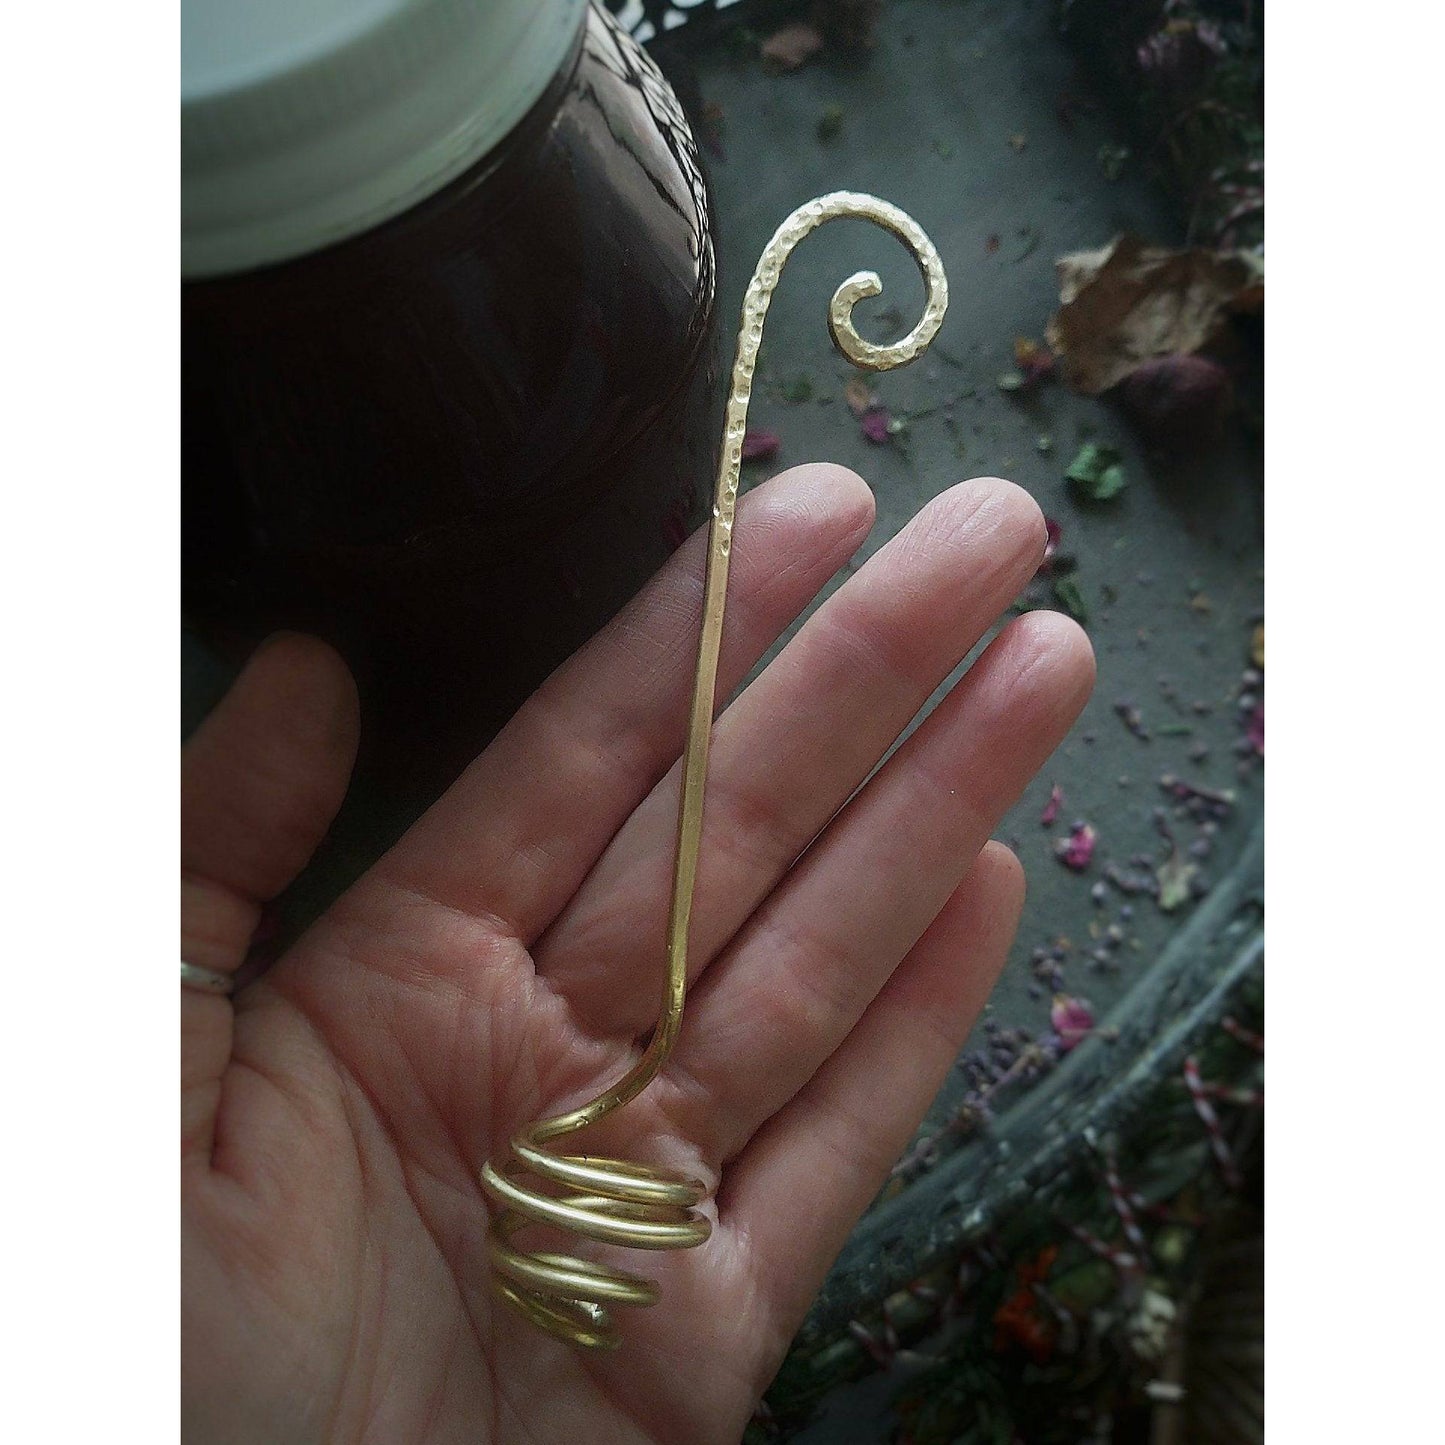 Hand Forged Brass Honey Dipper - Cold Creek Natural Farm